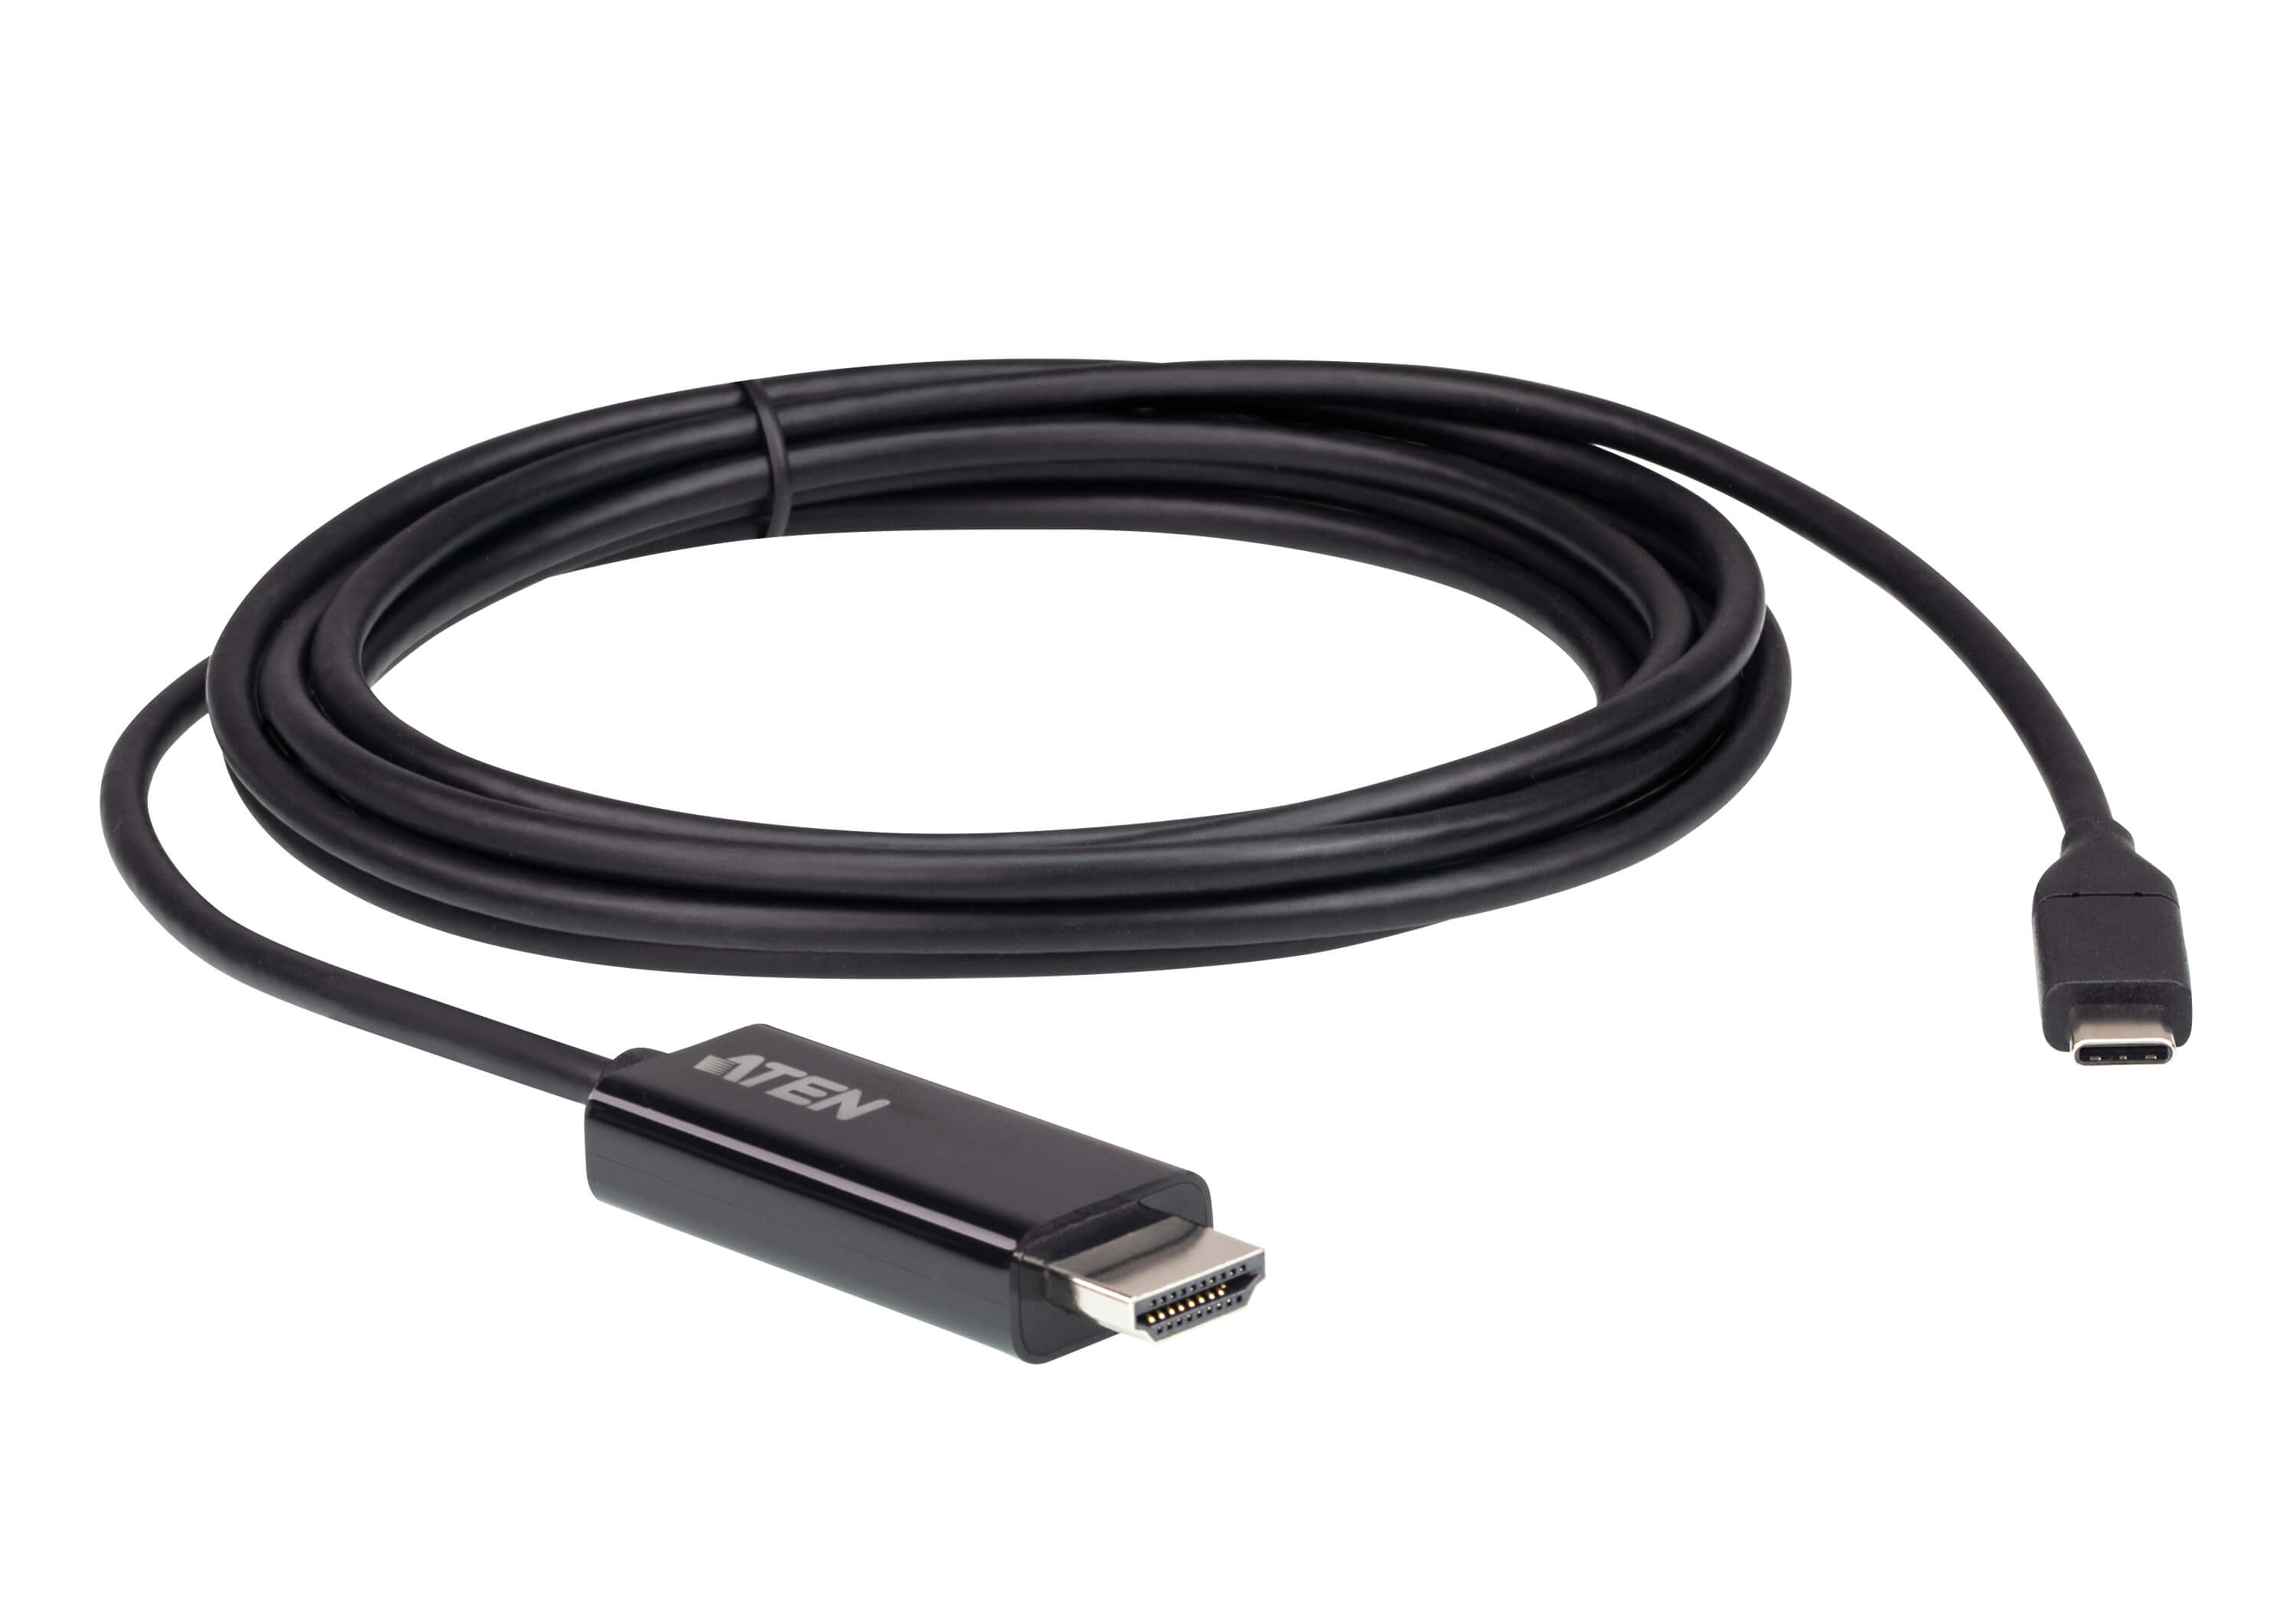 Aten, USB-C, to, HDMI, 4K, 2.7m, Cable, supports, up, to, 4K, @, 60Hz, with, high, quality, cable, 